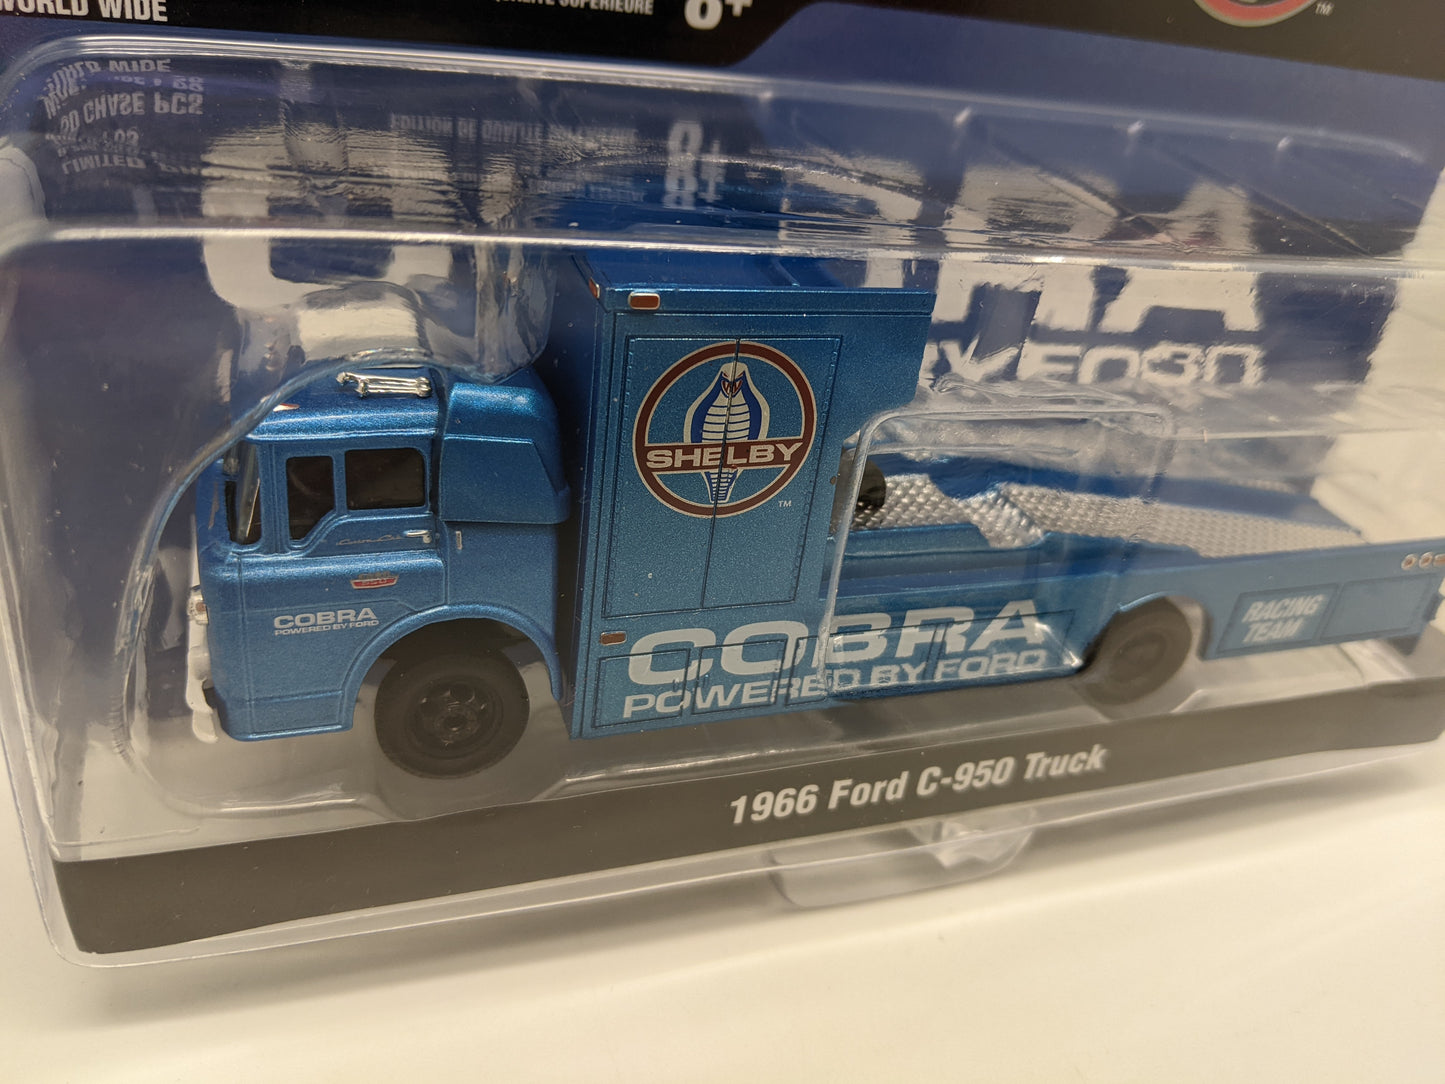 M2 1966 Ford C-950 Truck - COBRA Powered by Ford